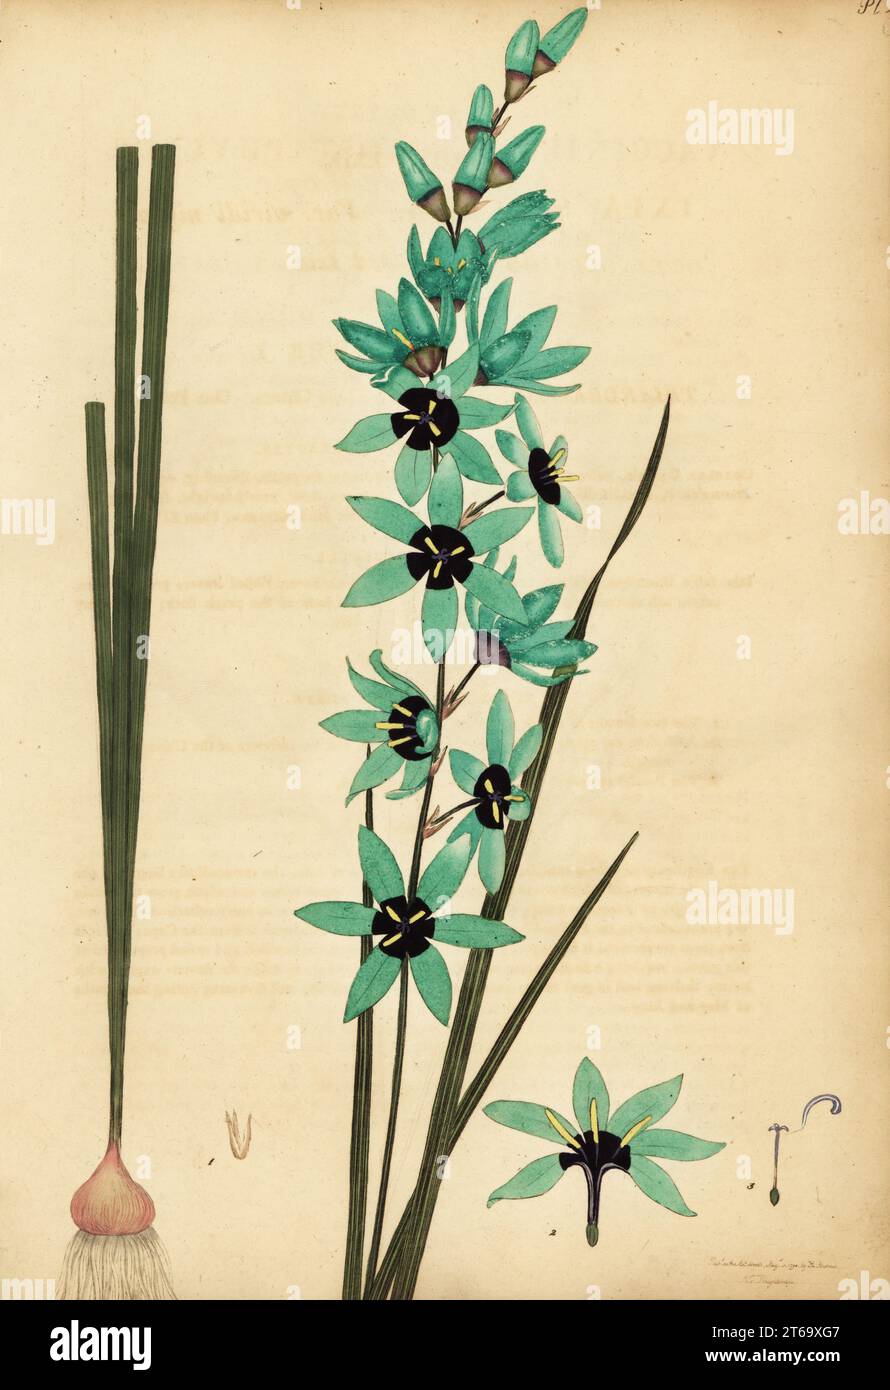 Turquoise ixia, Ixia viridiflora. Sea-green spiked ixia, Ixia spicata var. viridi nigra. Copperplate engraving drawn, engraved and hand-coloured by Henry Andrews from his Botanical Register, Volume 1, published in London, 1799. Stock Photo